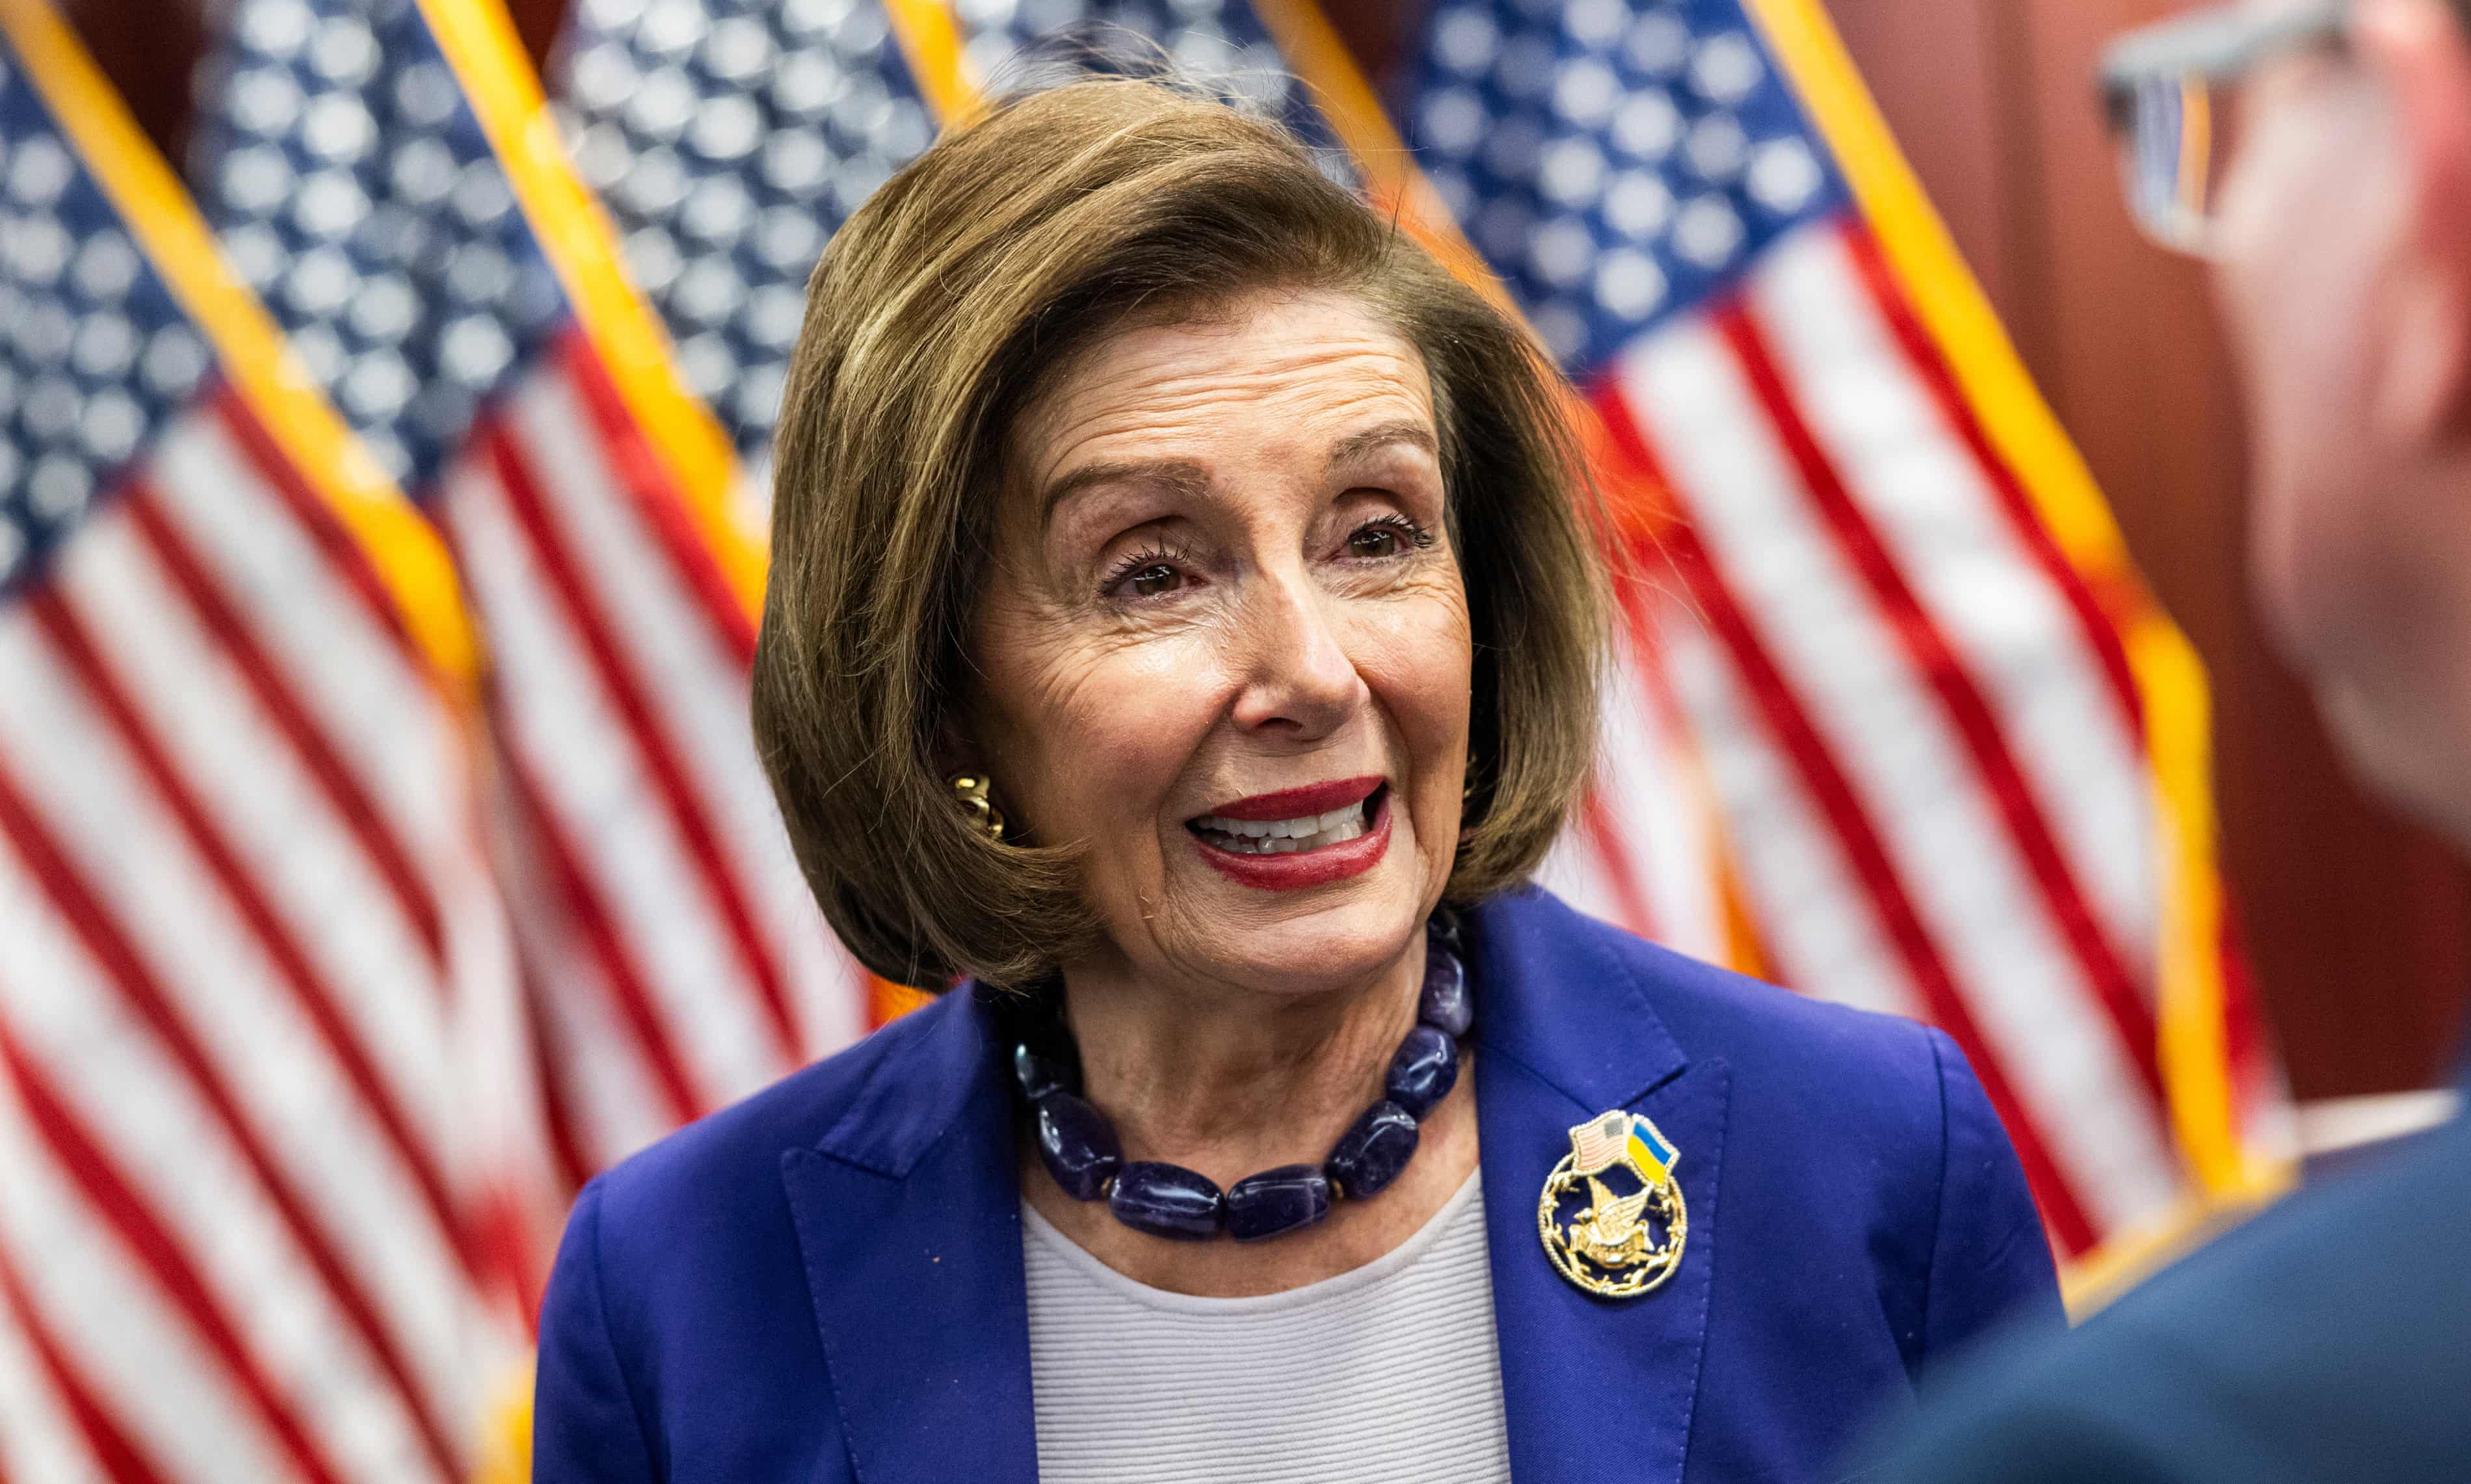 Pelosi joins Dems to call for end to arms sales to Israel